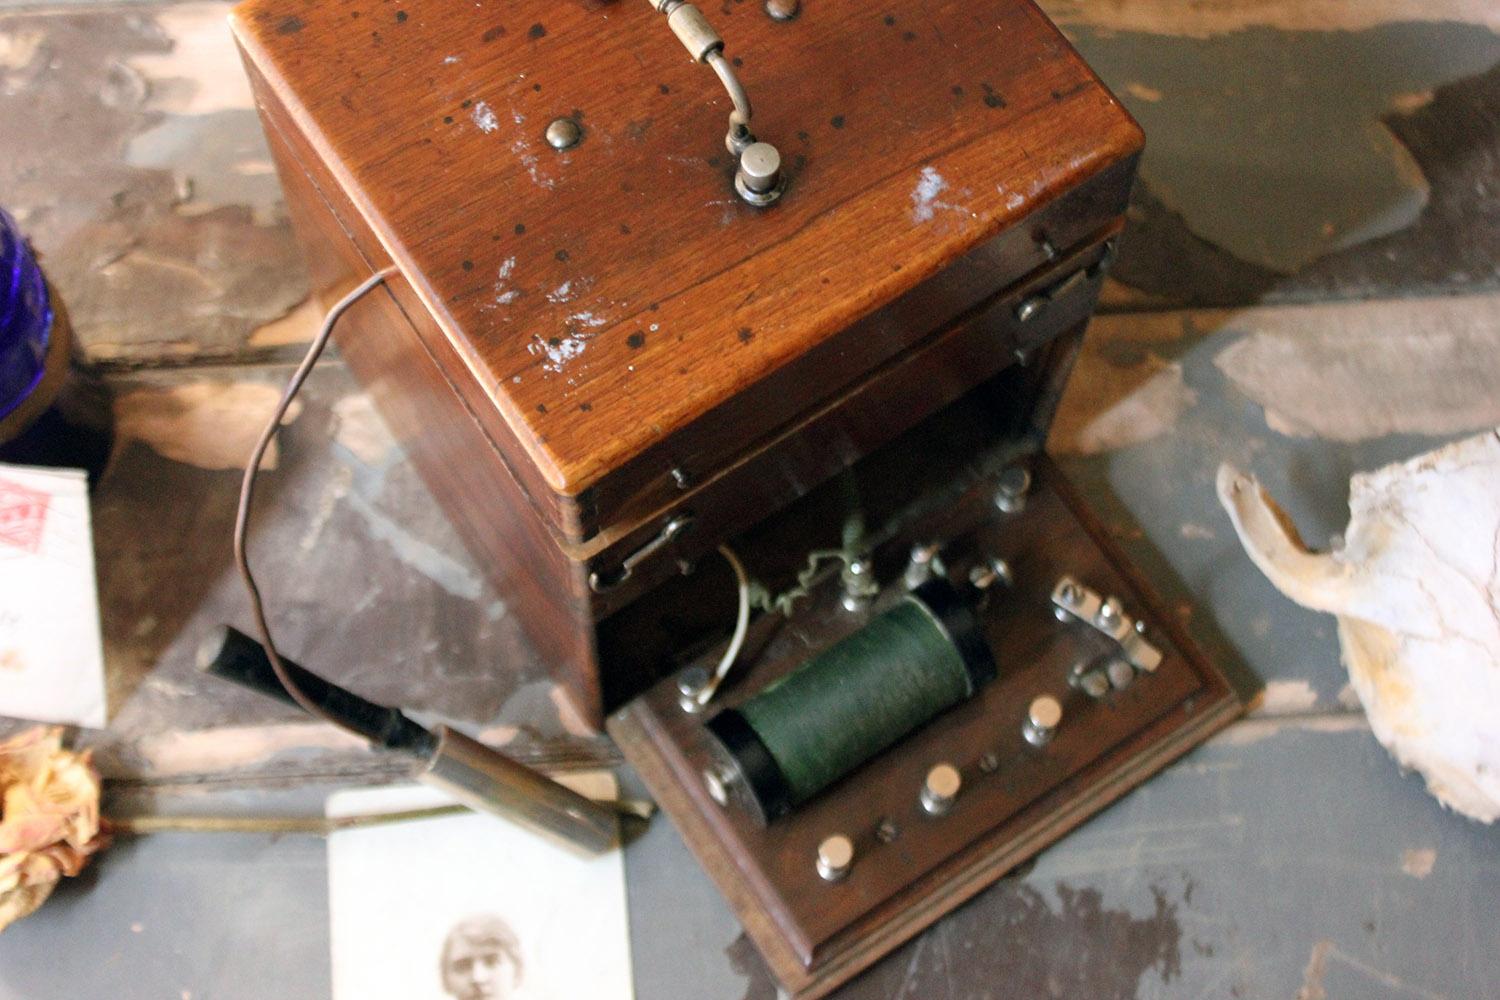 The 19th century electro therapy shock machine, with induction coil with two brass tubes attached to cables through which the current flows, used to treat ‘nervous diseases’ and housed in a good oak Campaign style dovetail jointed box with the